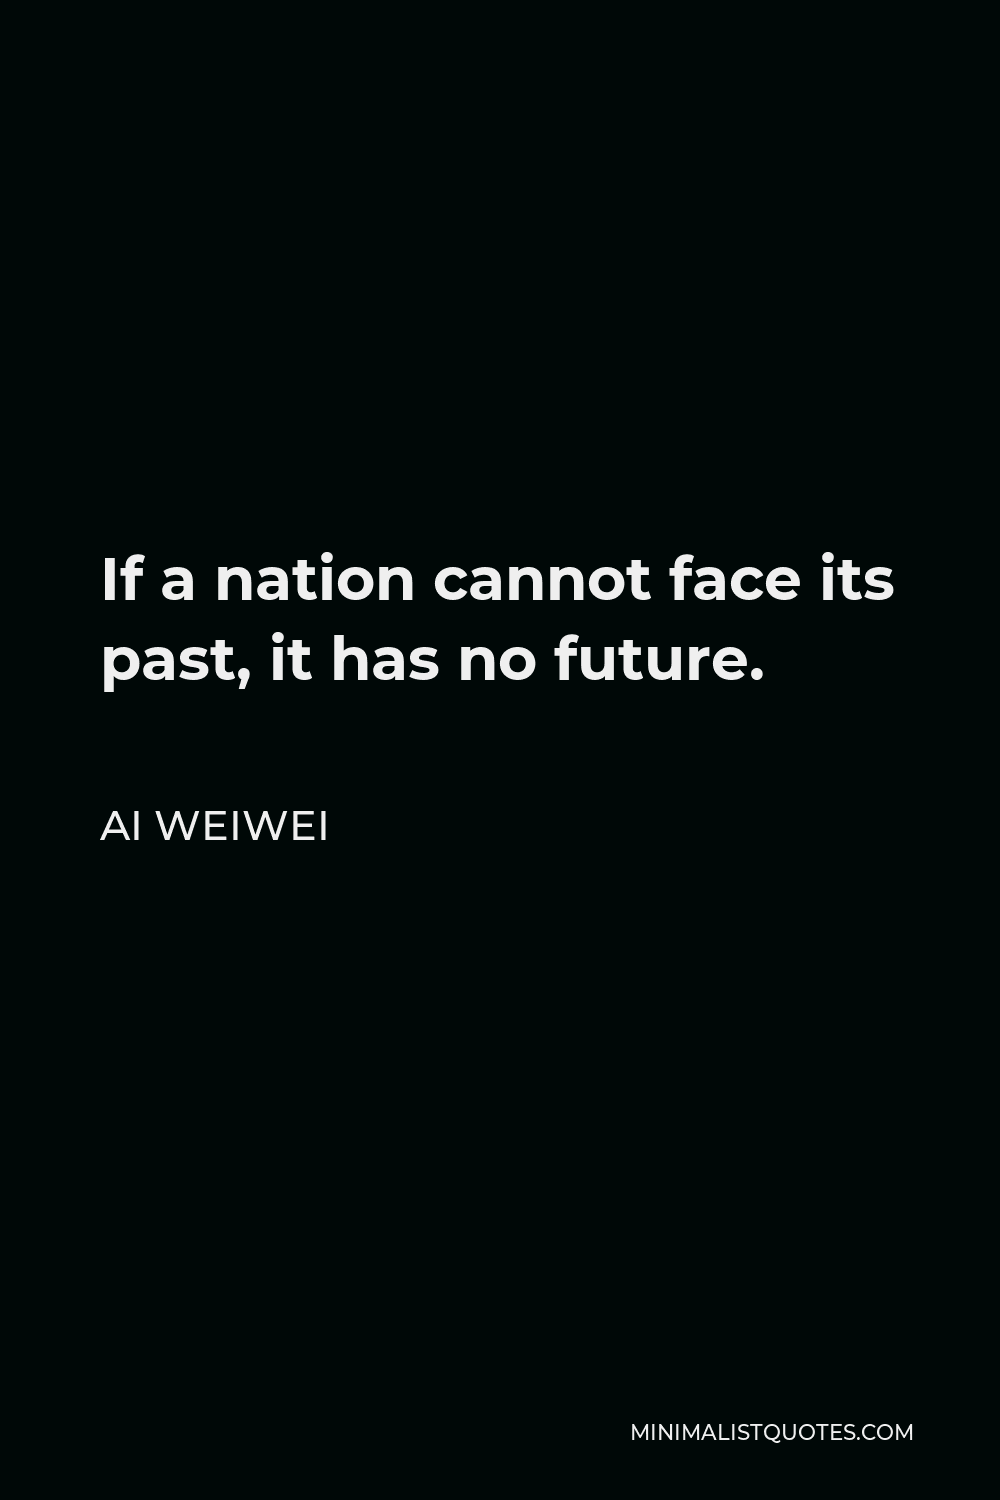 Ai Weiwei Quote - If a nation cannot face its past, it has no future.